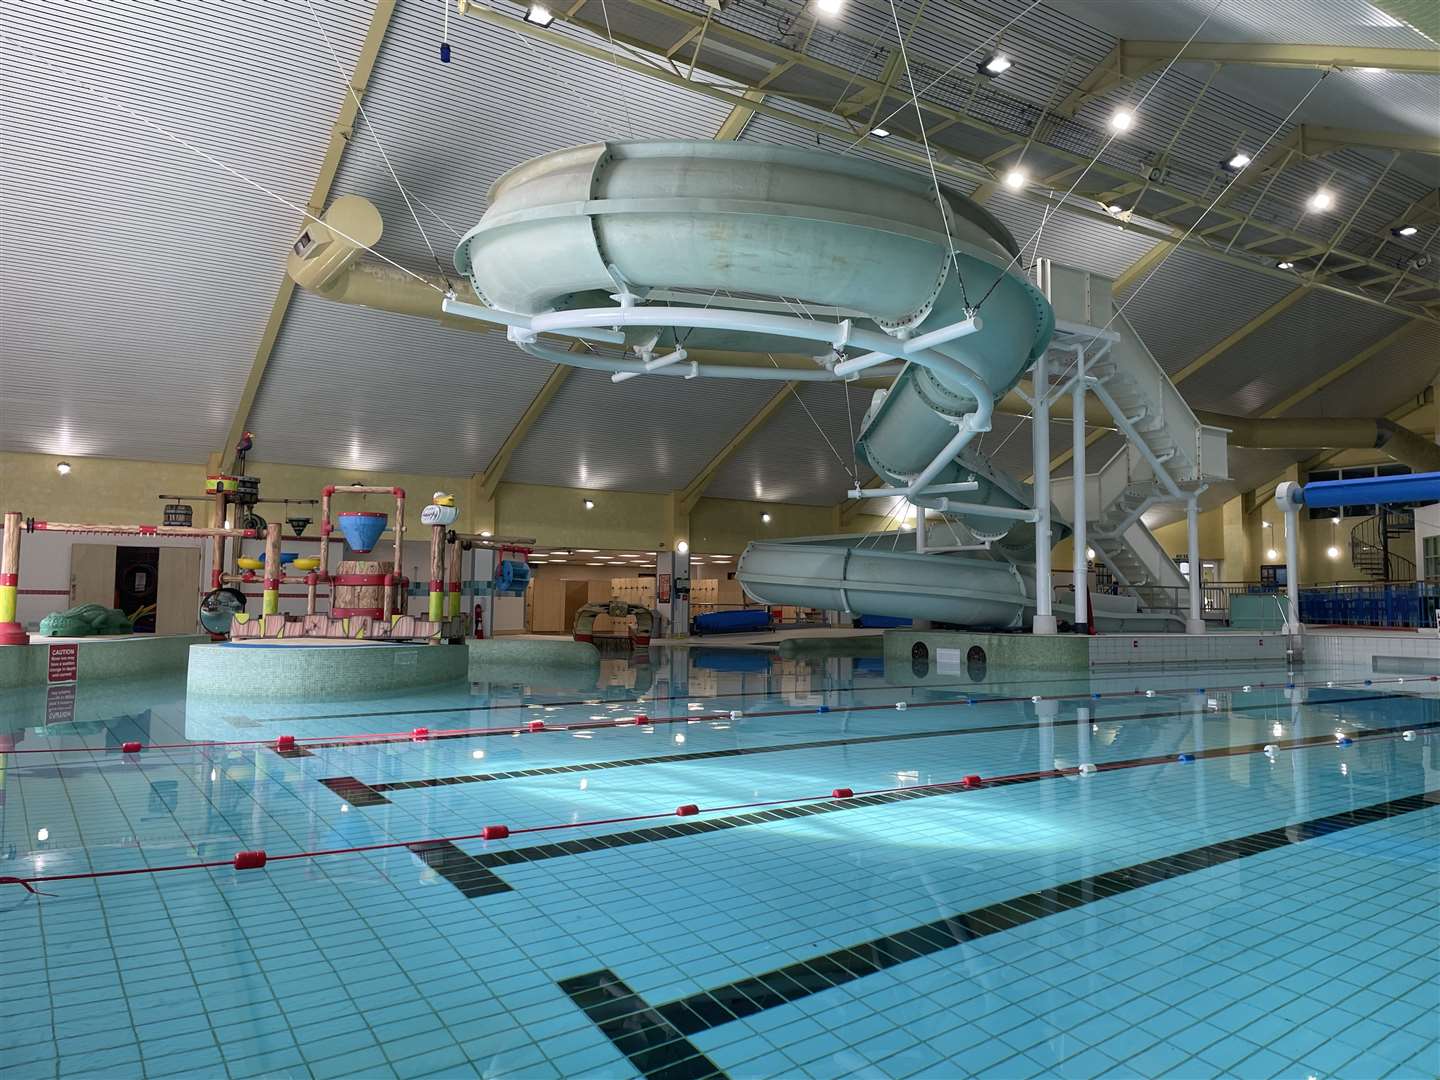 Tenterden Leisure Centre's swimming pool has been shut for months after debris fell from a roof